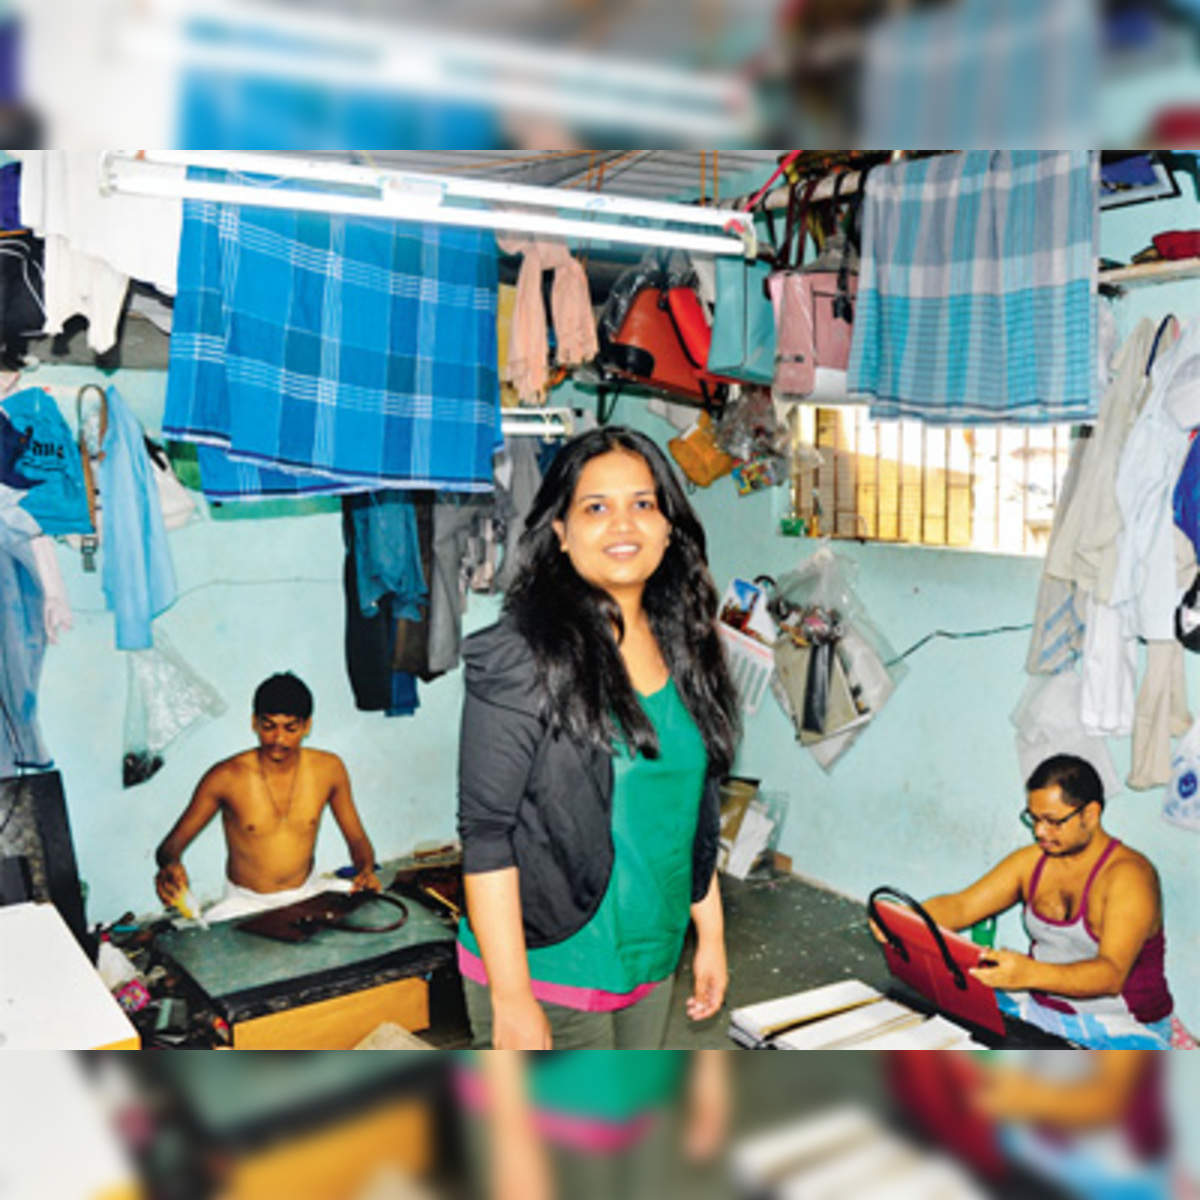 Megha Gupta's Dharavimarket.com aims to sell products by Dharavi's  craftspeople across the world - The Economic Times